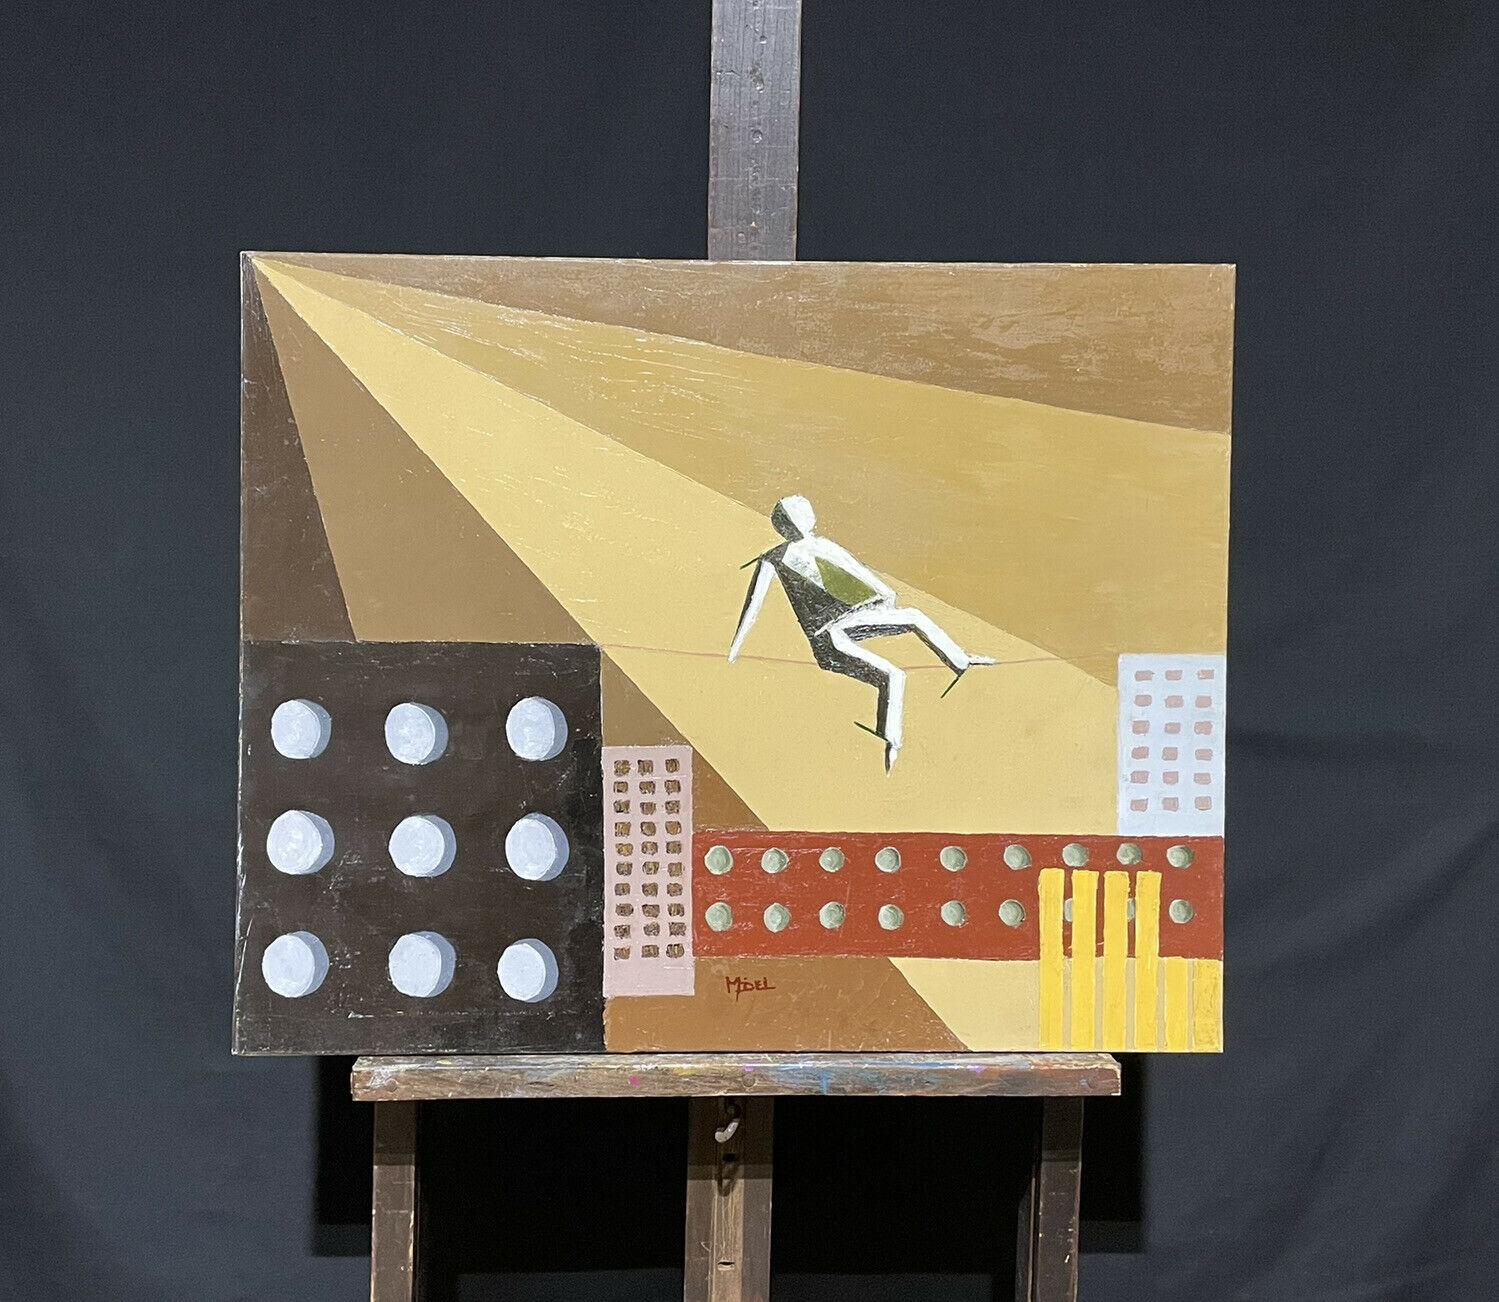 CONTEMPORARY FRENCH CUBIST ABSTRACT - GEOMETRIC COMPOSITION - TIGHTROPE WALKER - Painting by French painter